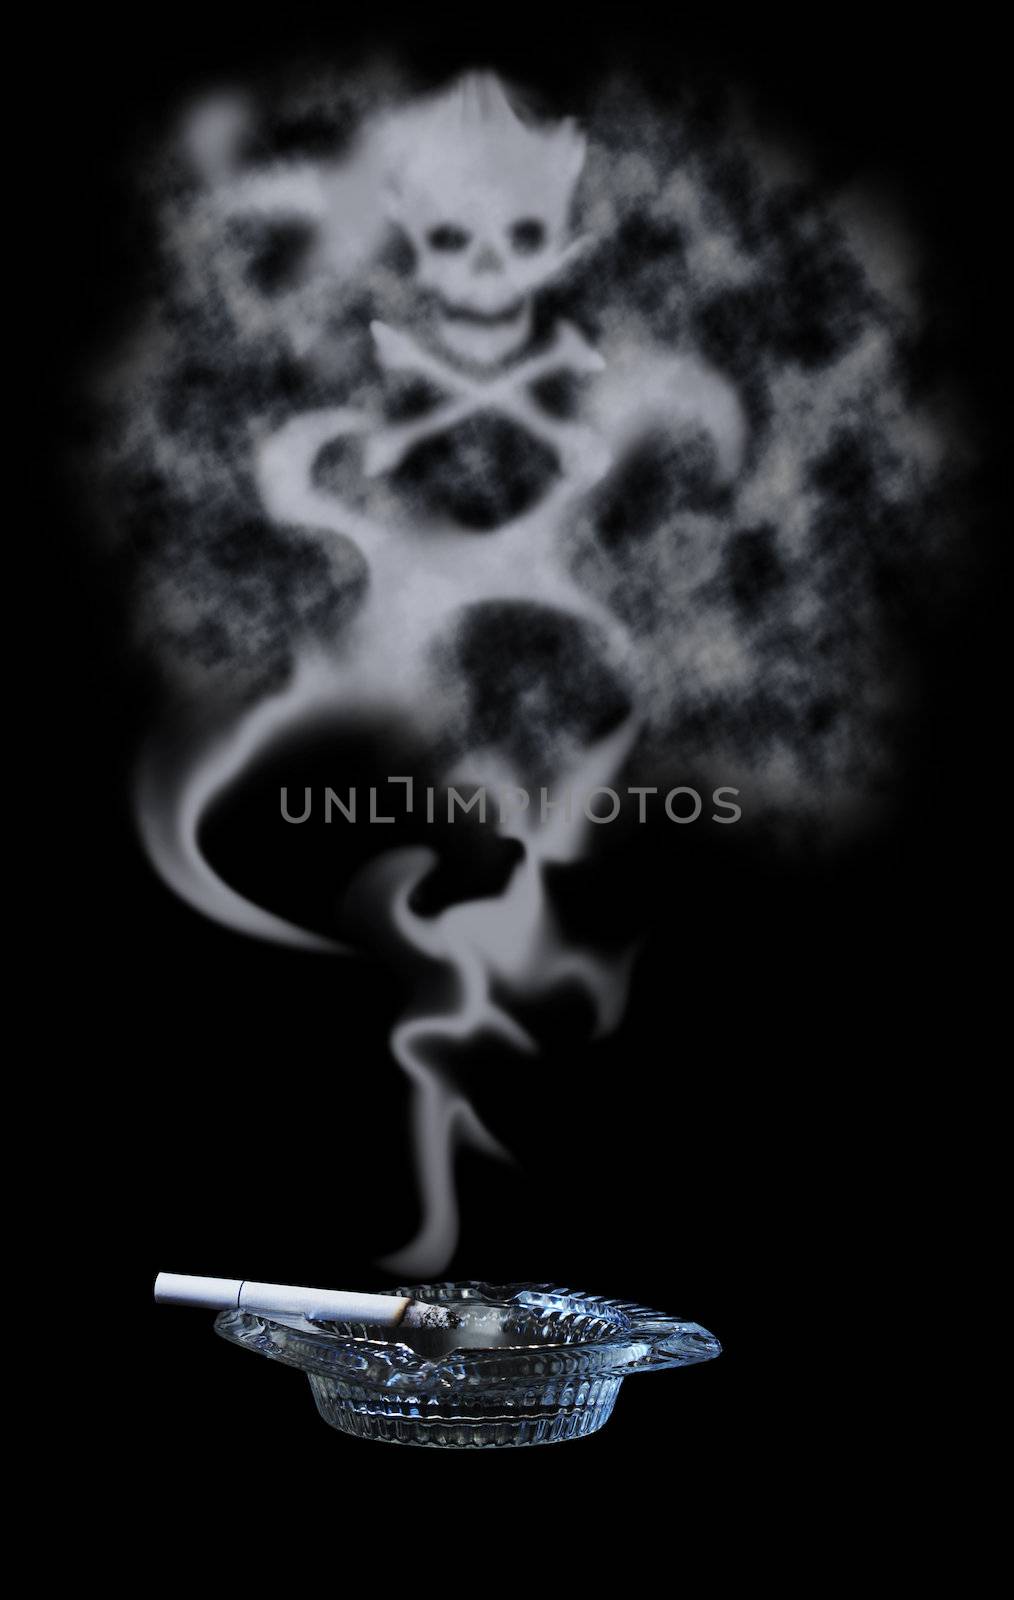 A lit cigarette resting in an ashtray with the poison symbol of the skull and crossbones forming in the smoke.